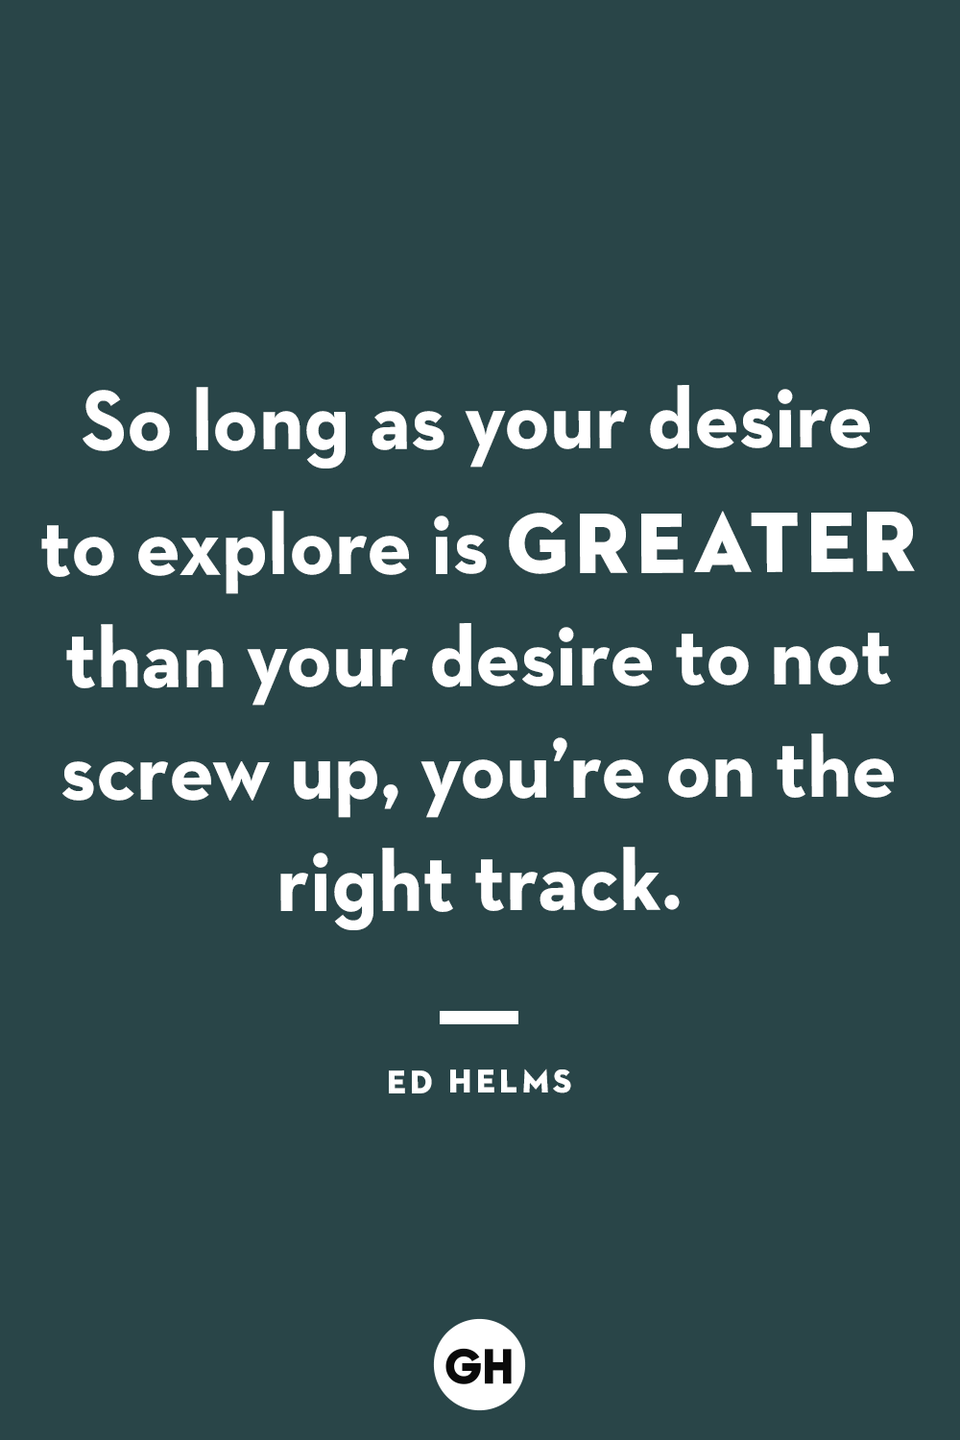 <p>So long as your desire to explore is greater than your desire to not screw up, you’re on the right track.</p>